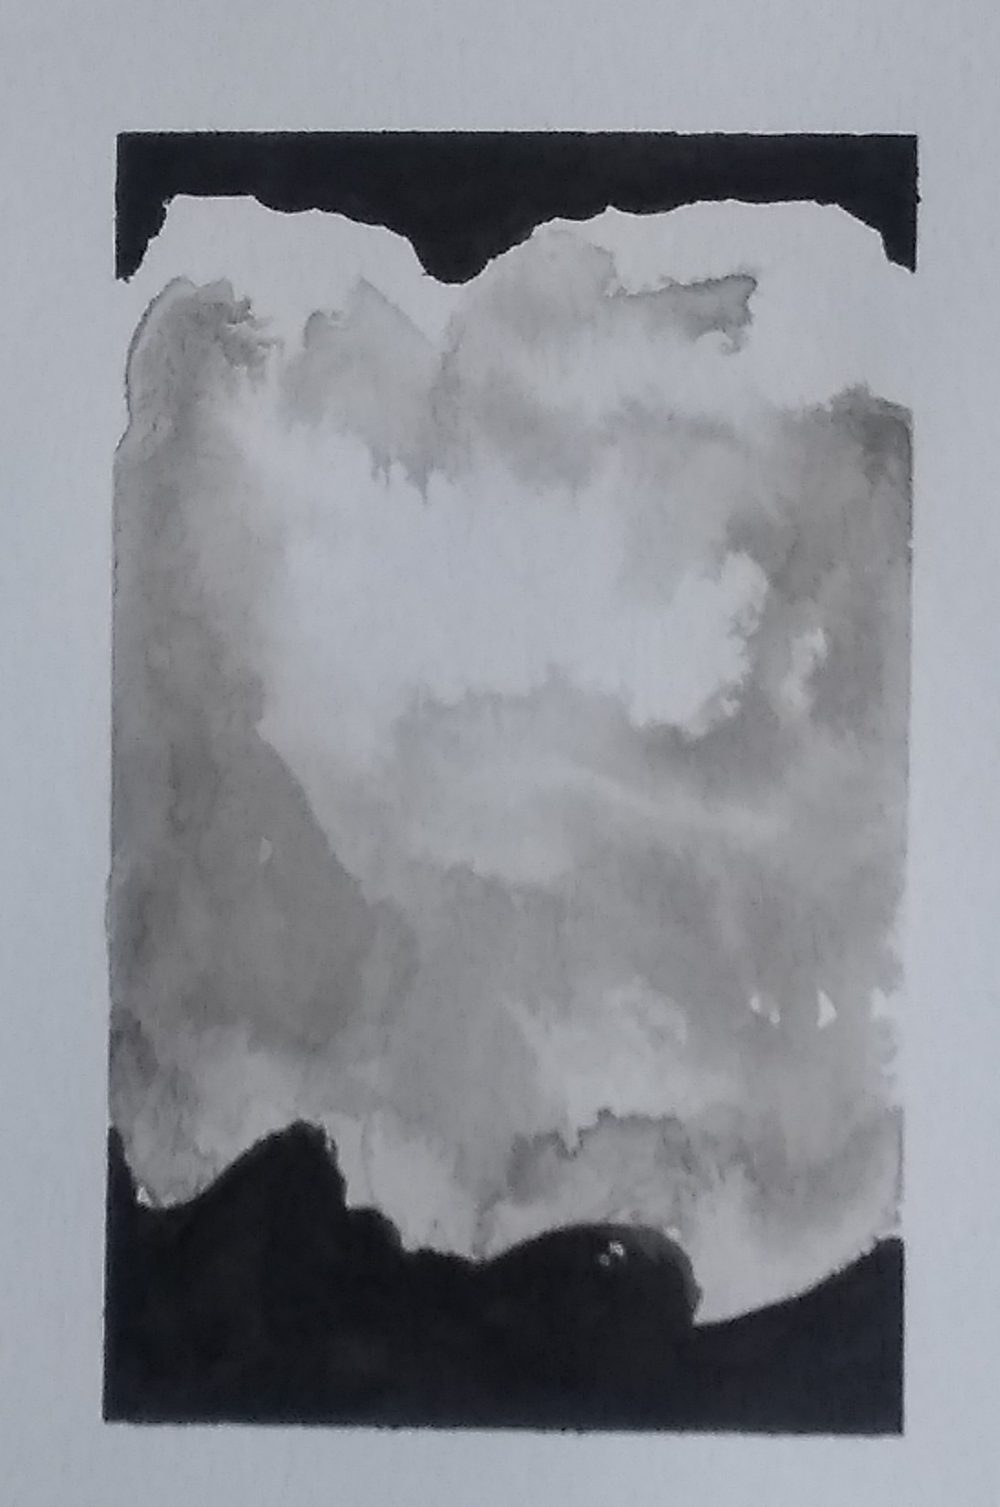 An interpretation of a Helen Frankenthaler painting using ink wash to explore value and shape.